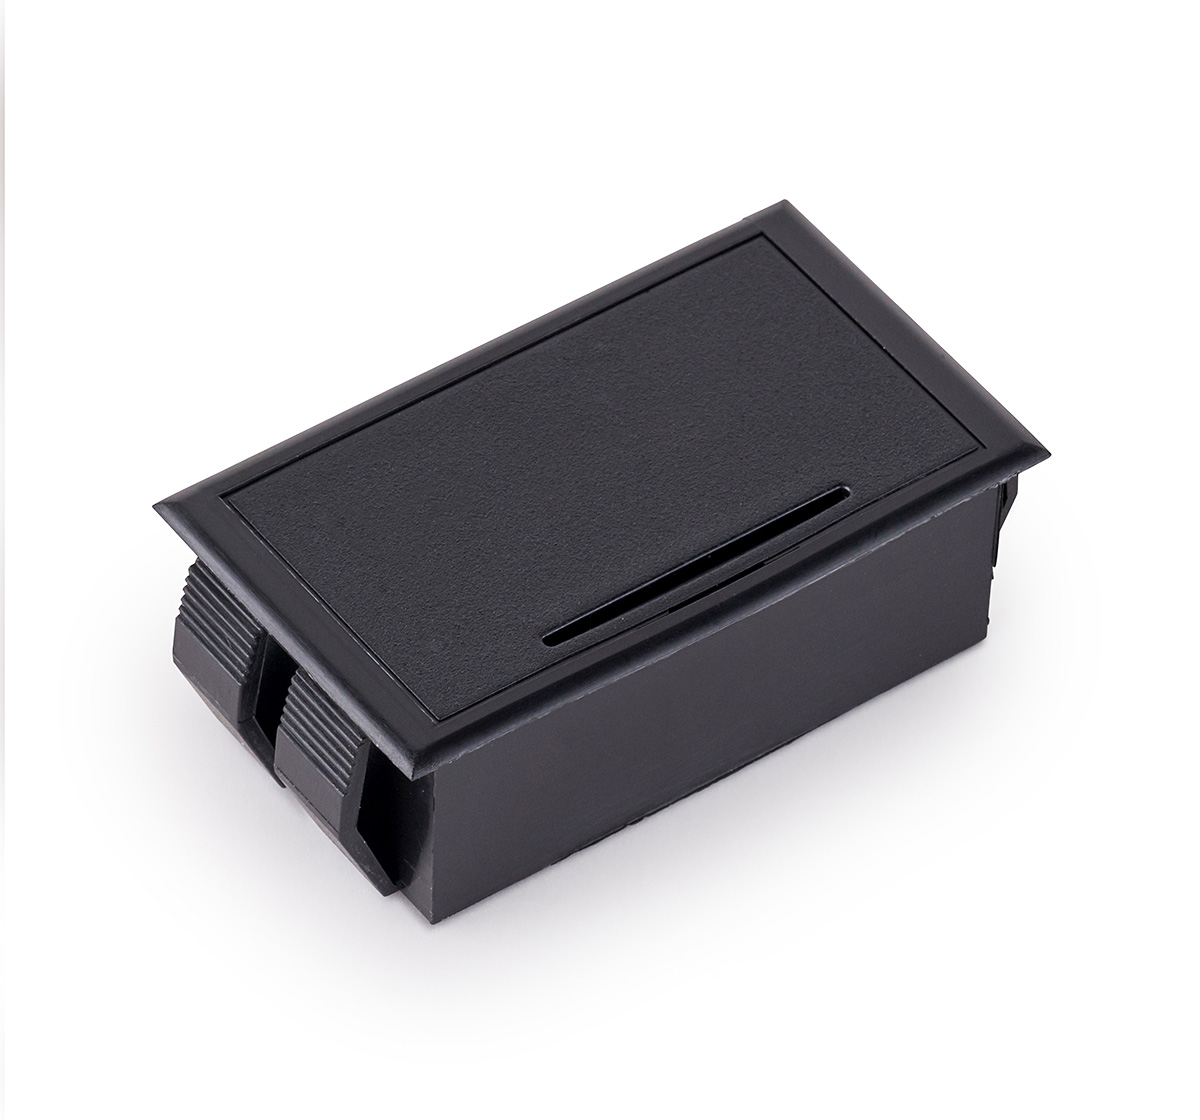 MEC Exterior Battery Compartment for 1 x 9V Battery, with detachable lid